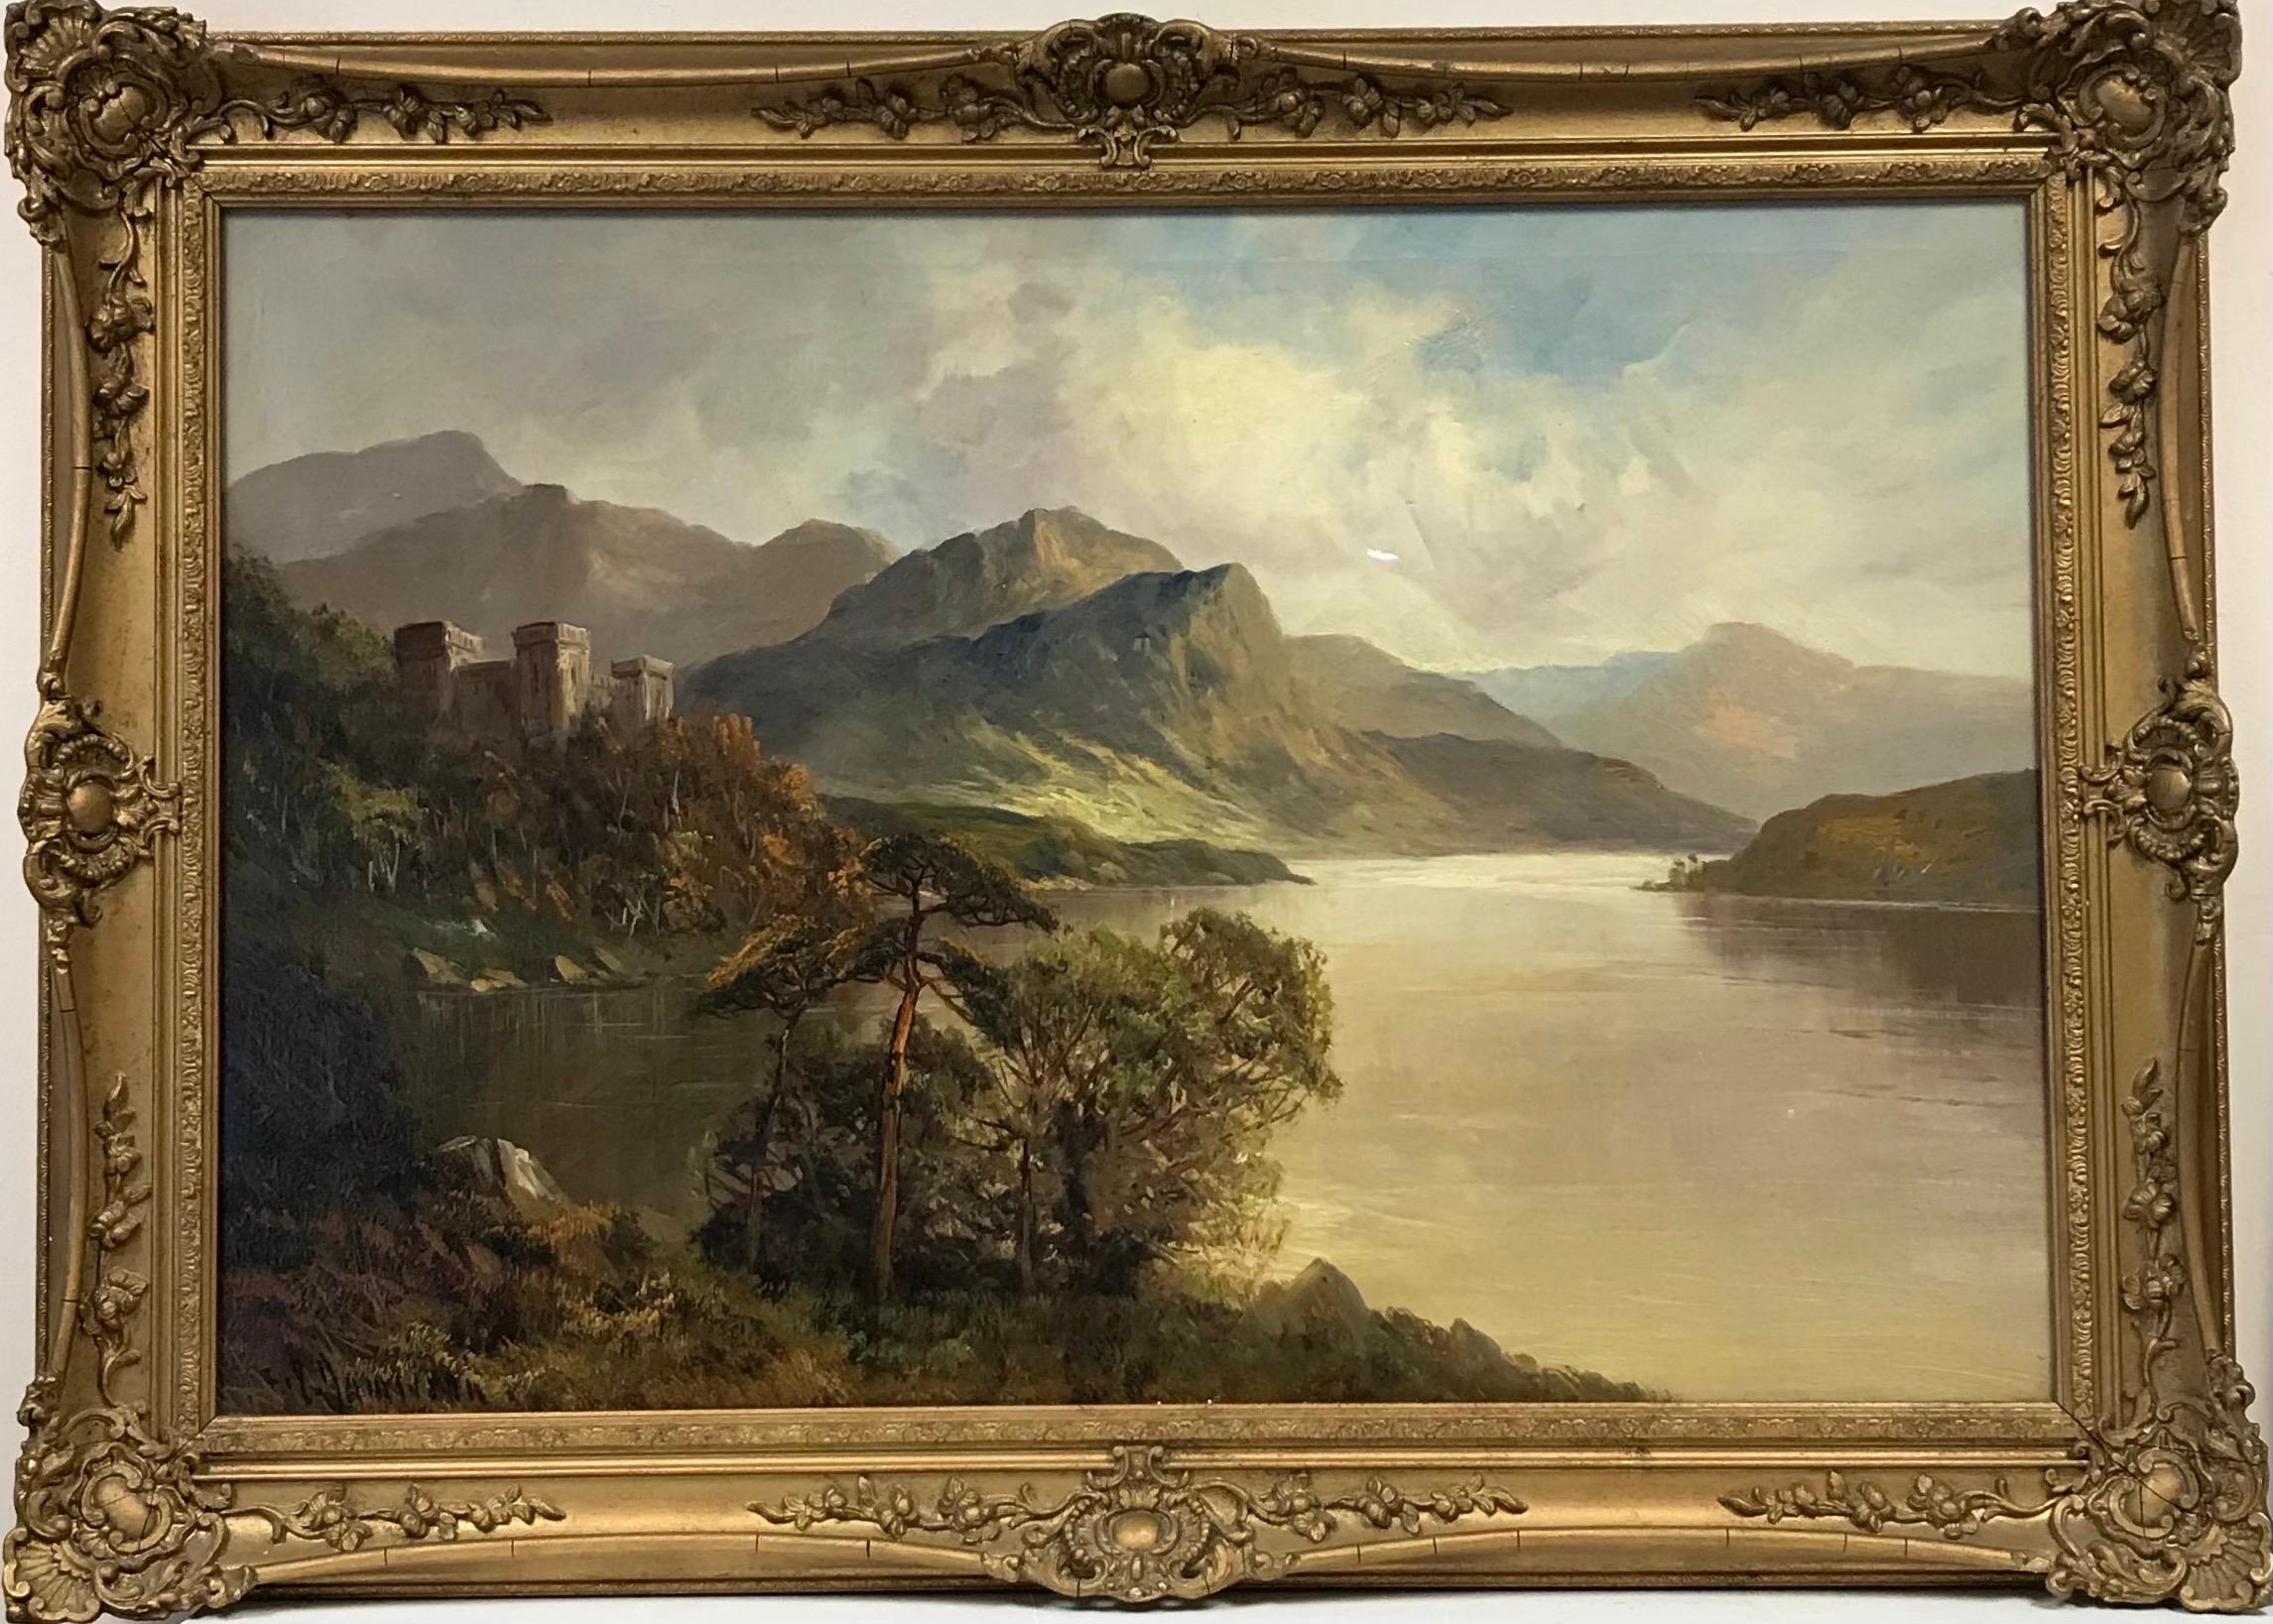 Francis E. Jamieson Landscape Painting - Antique Scottish Oil Painting Castle Ruins Overlooking Majestic Highland Loch